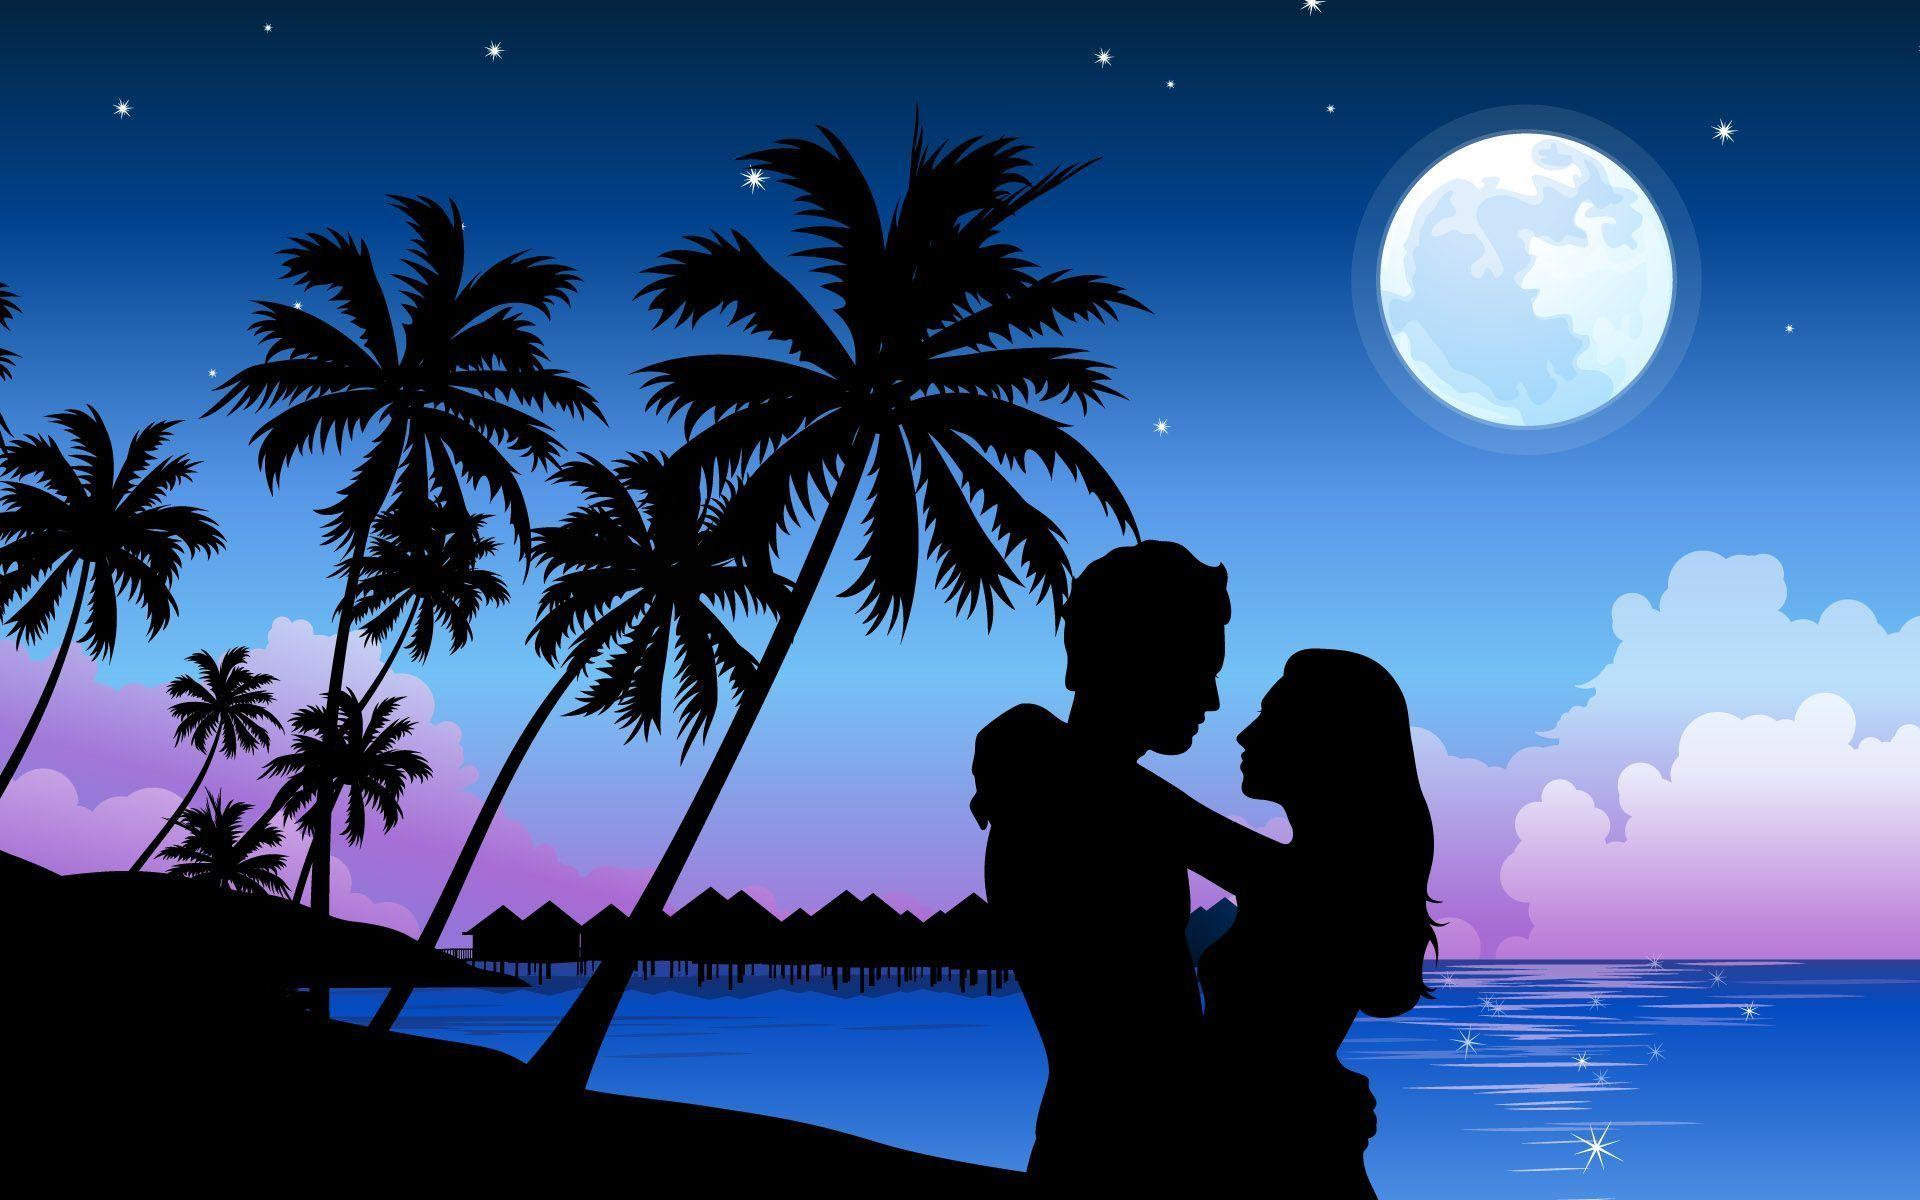 Romantic Love Wallpapers: Discover the ultimate collection of romantic love wallpapers and let the enchanting beauty of love fill your day. With a wide range of designs and styles, our wallpapers will certainly create a romantic and blissful atmosphere for any occasion.